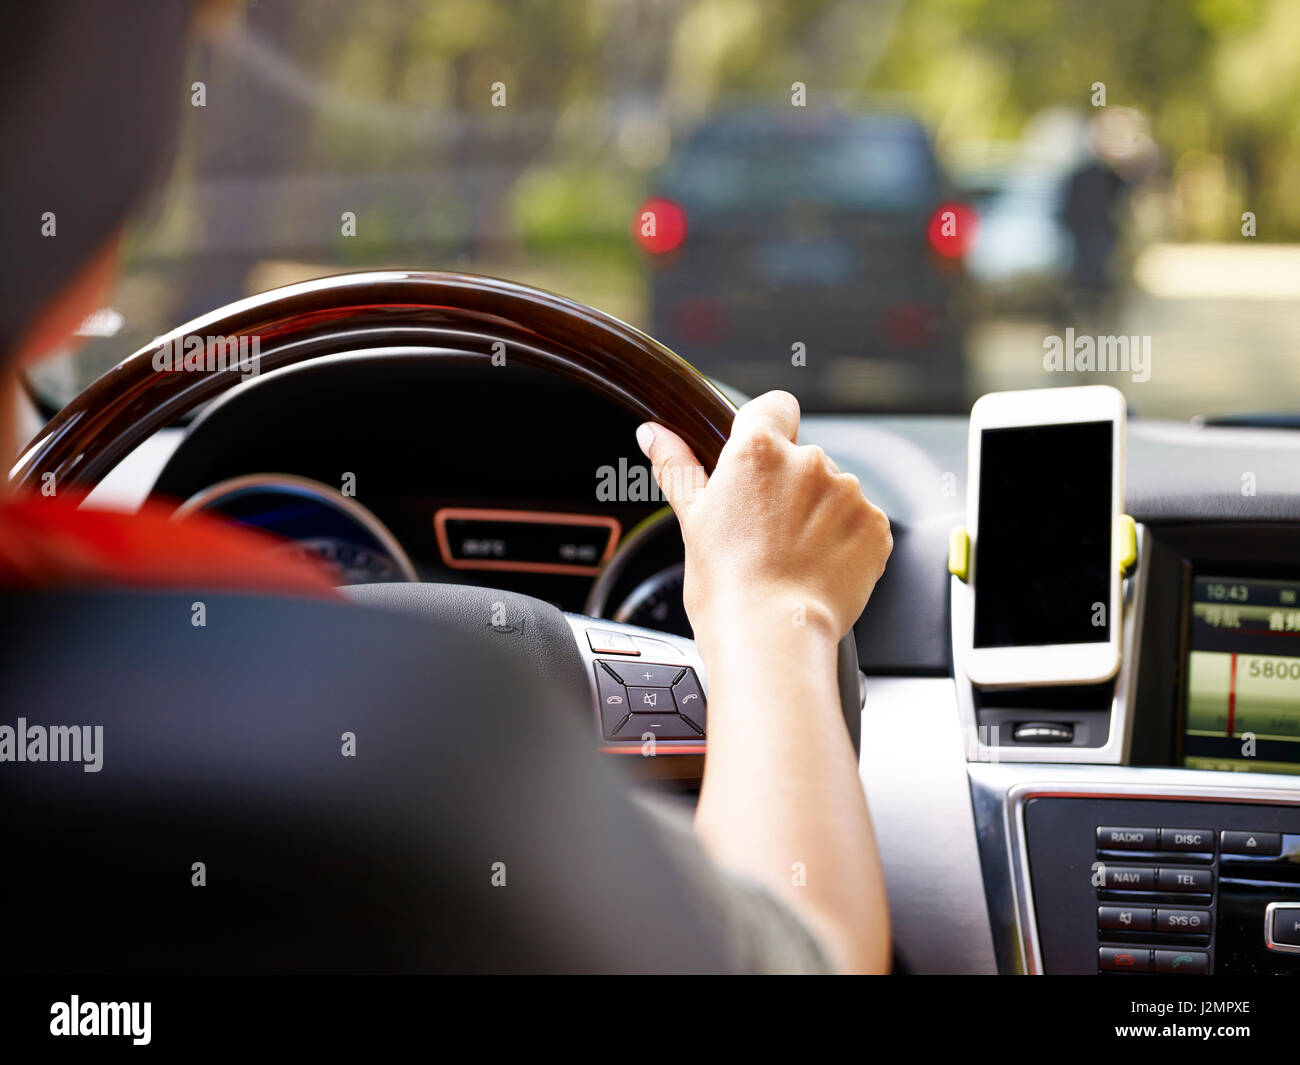 hand of a female holding the steering wheel of a vehicle with a cellphone mounted on the dashboard. Stock Photo